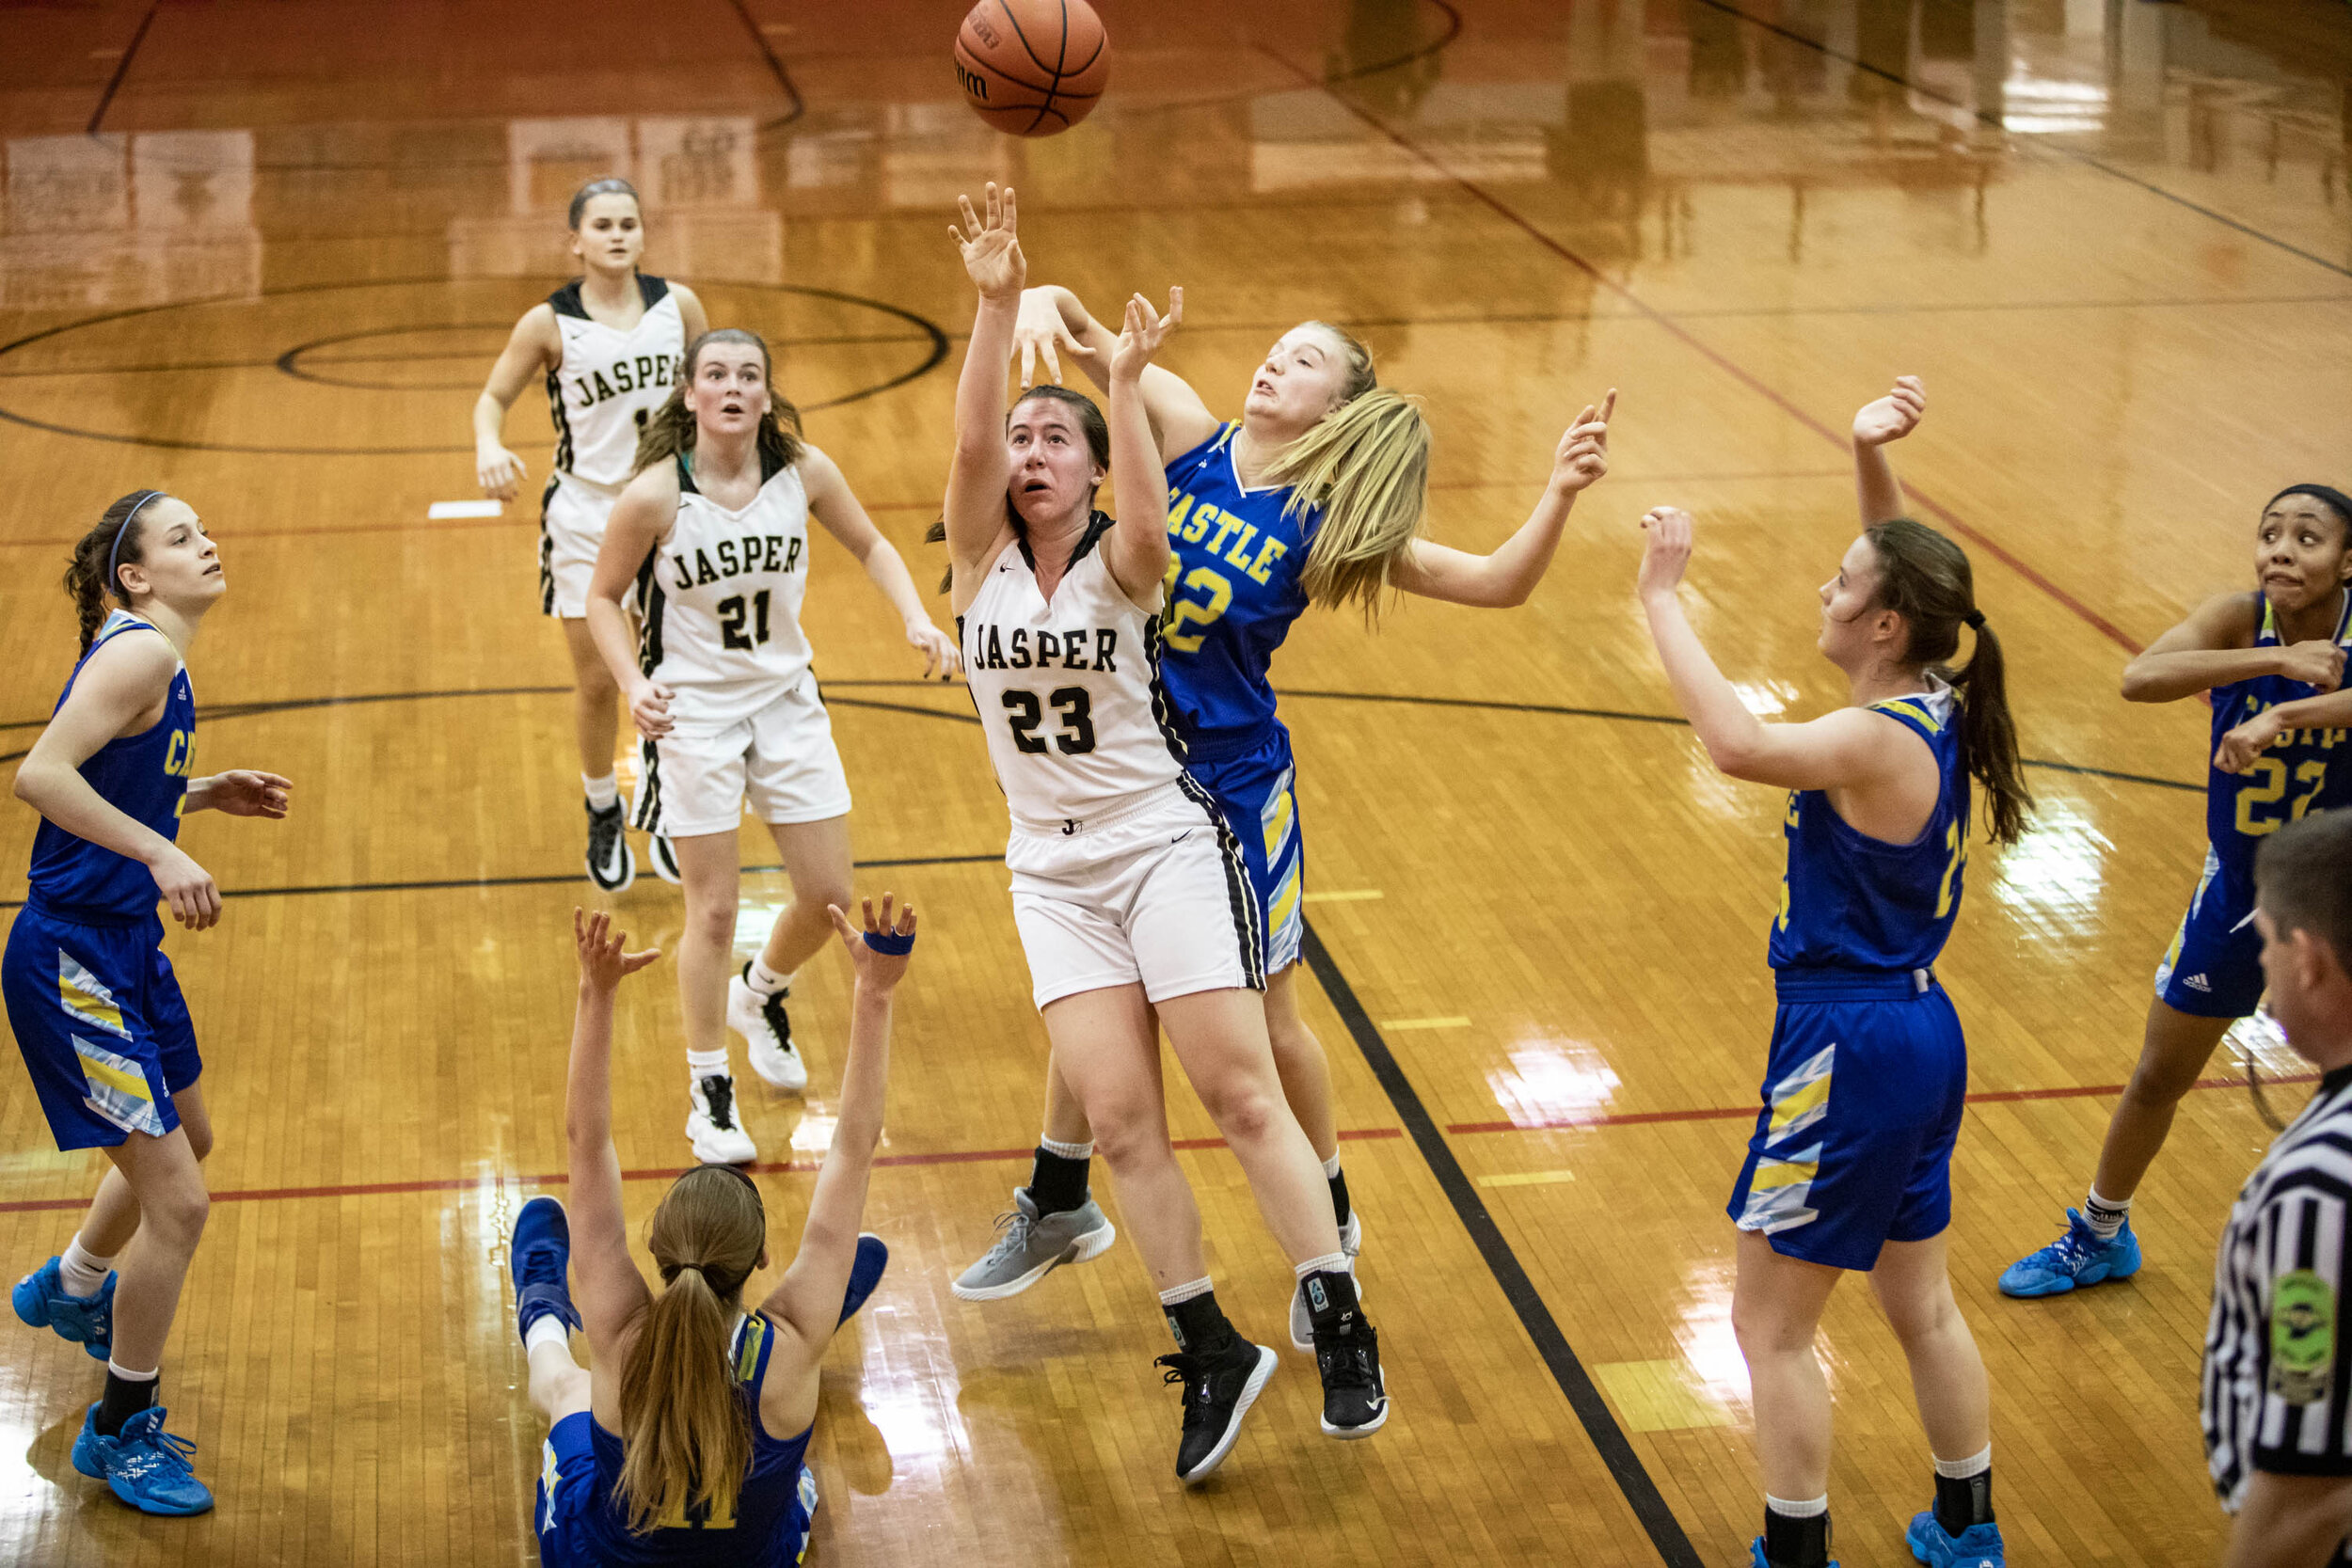  Jasper's Hannah Schwenk (23) shoots the ball during Tuesday's girls basketball sectional game in Evansville, Indiana on Feb. 4, 2020. Castle defeated Jasper 54-44.  